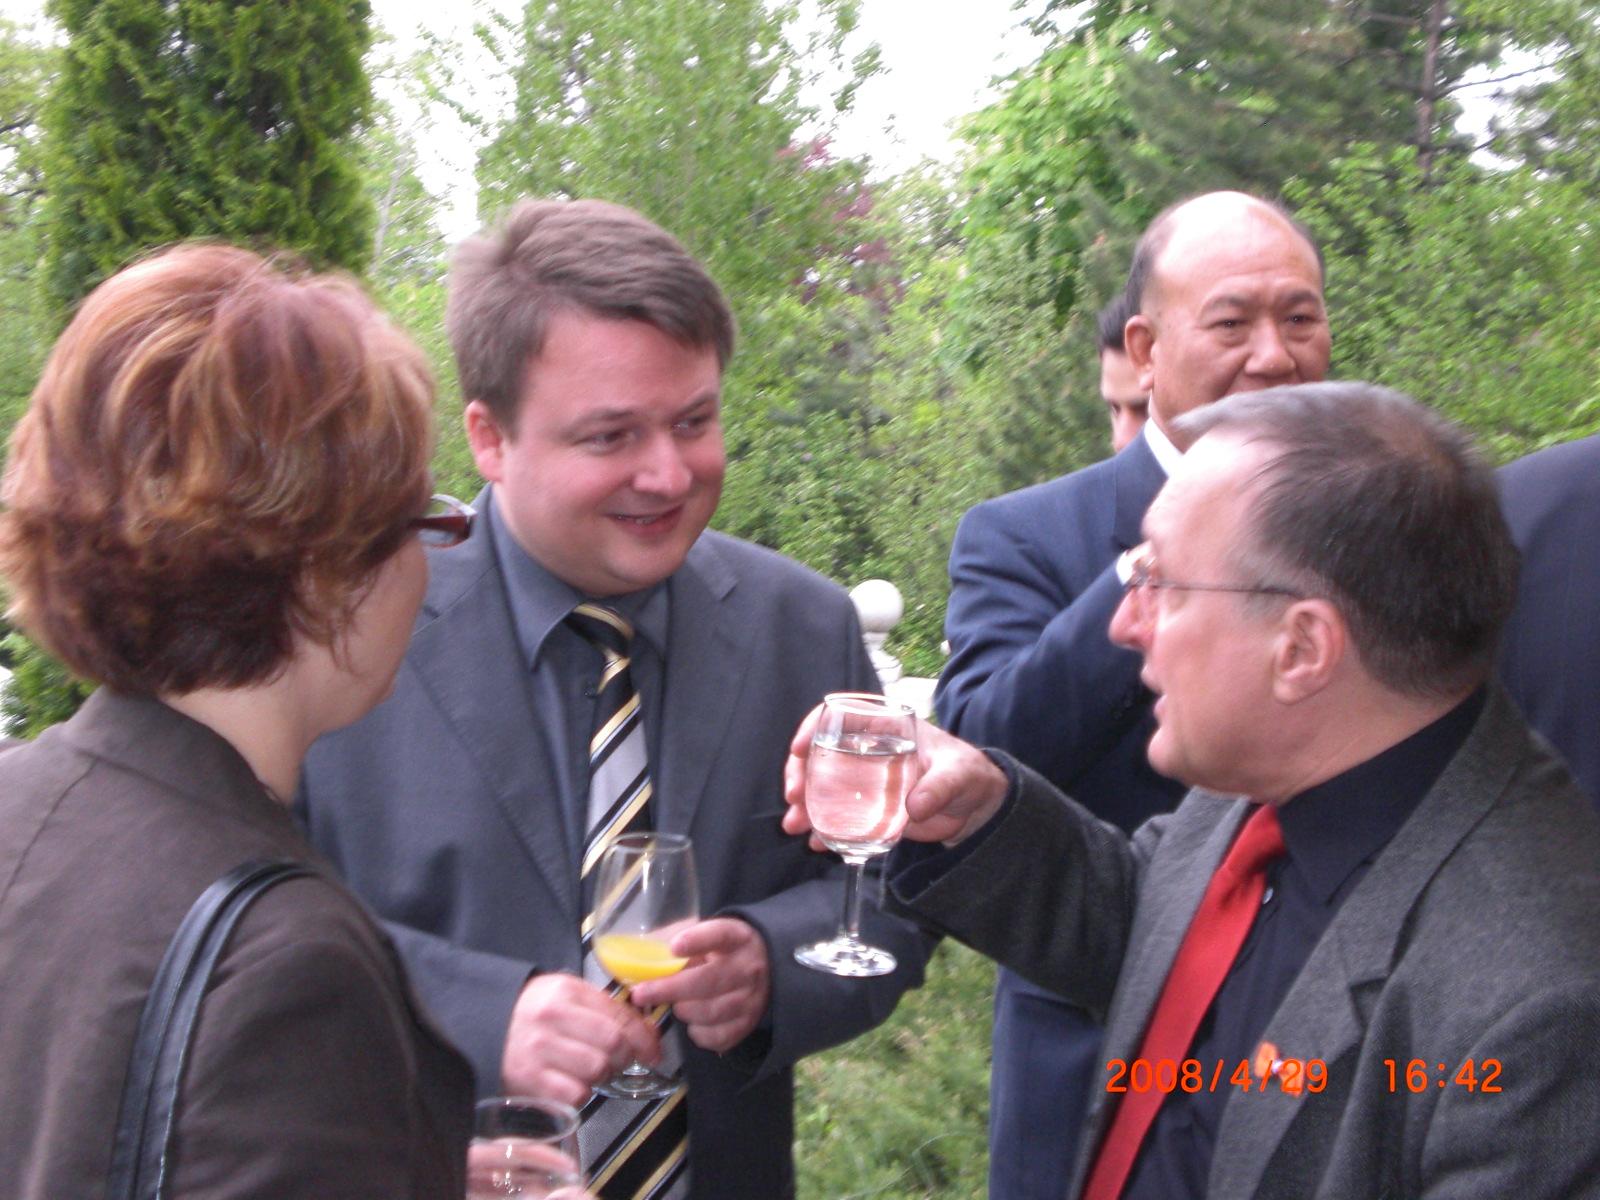 'Dutch Queen's Day Reception', Ambassador of the Netherlands Residence, 29 April 2008